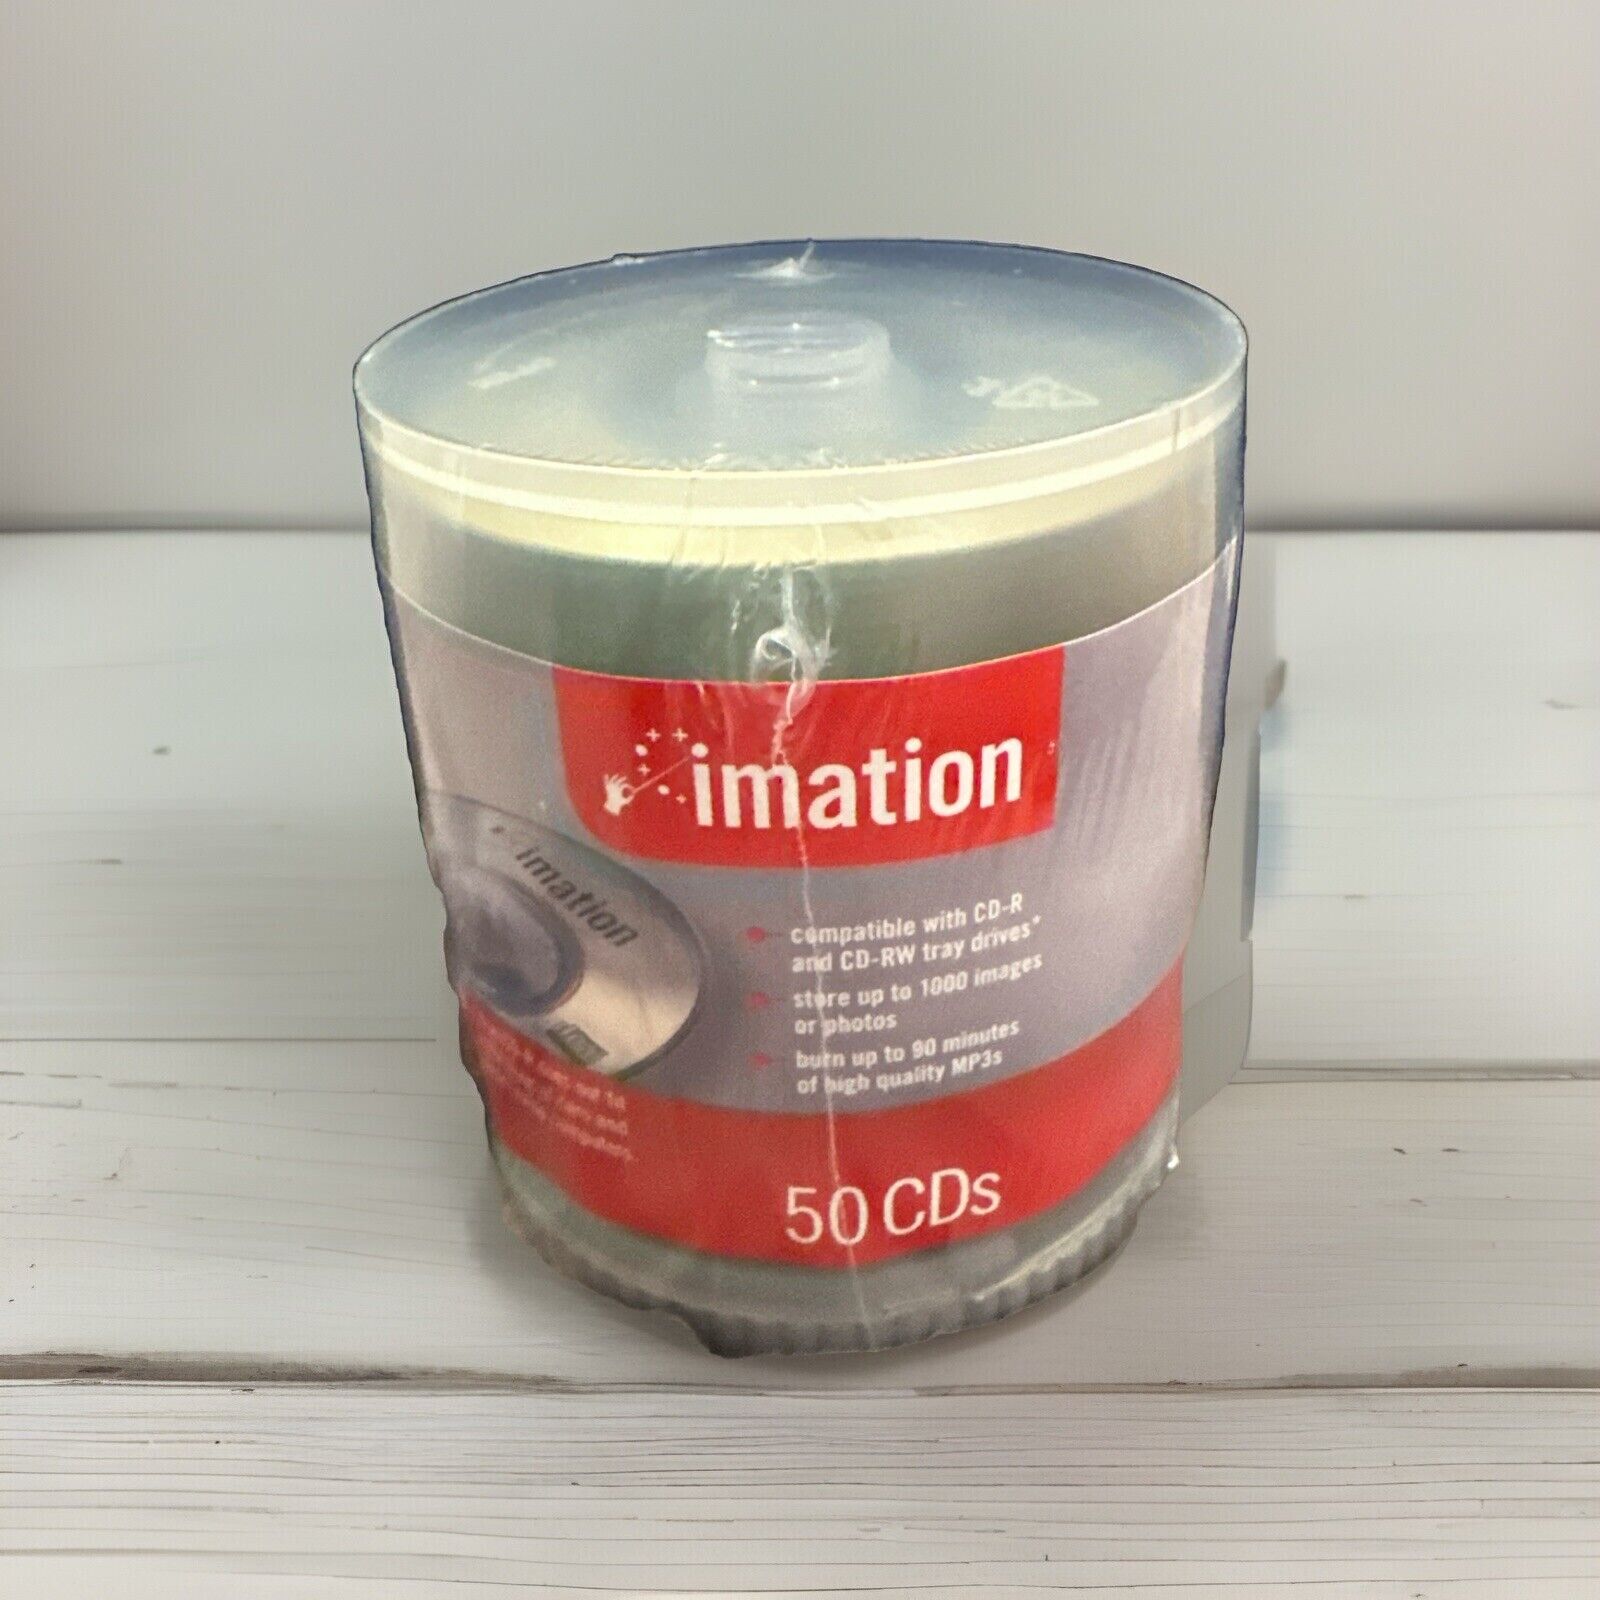 Imation Mini CD-R 50-count Spindle 23 MIN 202 MB 8 cm 80 mm New/Sealed